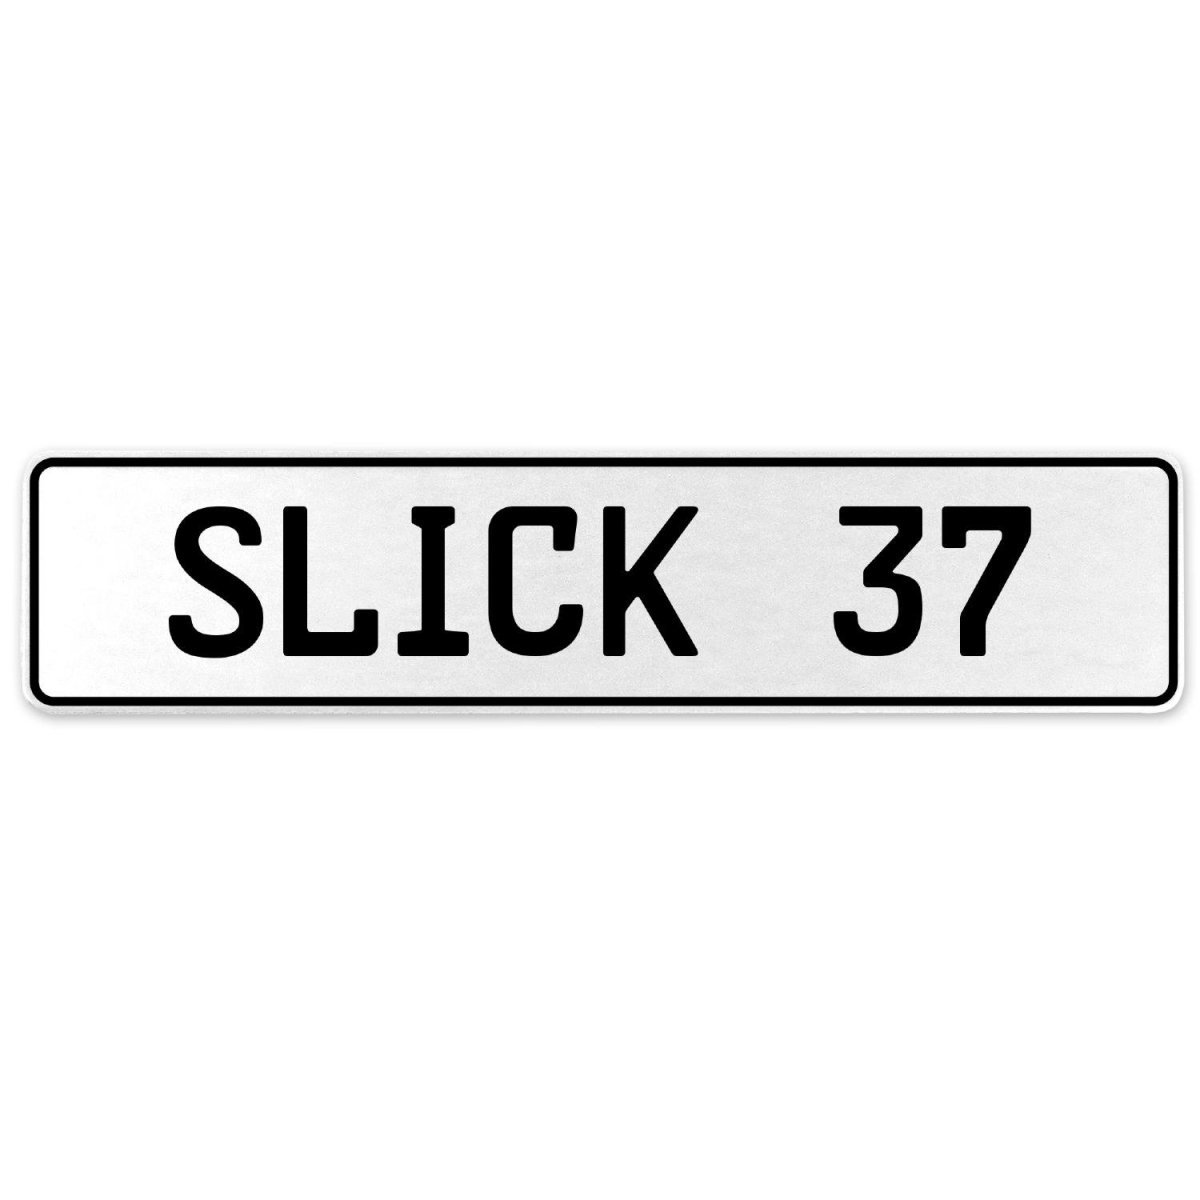 Slick 37 - White Aluminum Street Sign Mancave Euro Plate Name Door Sign Wall